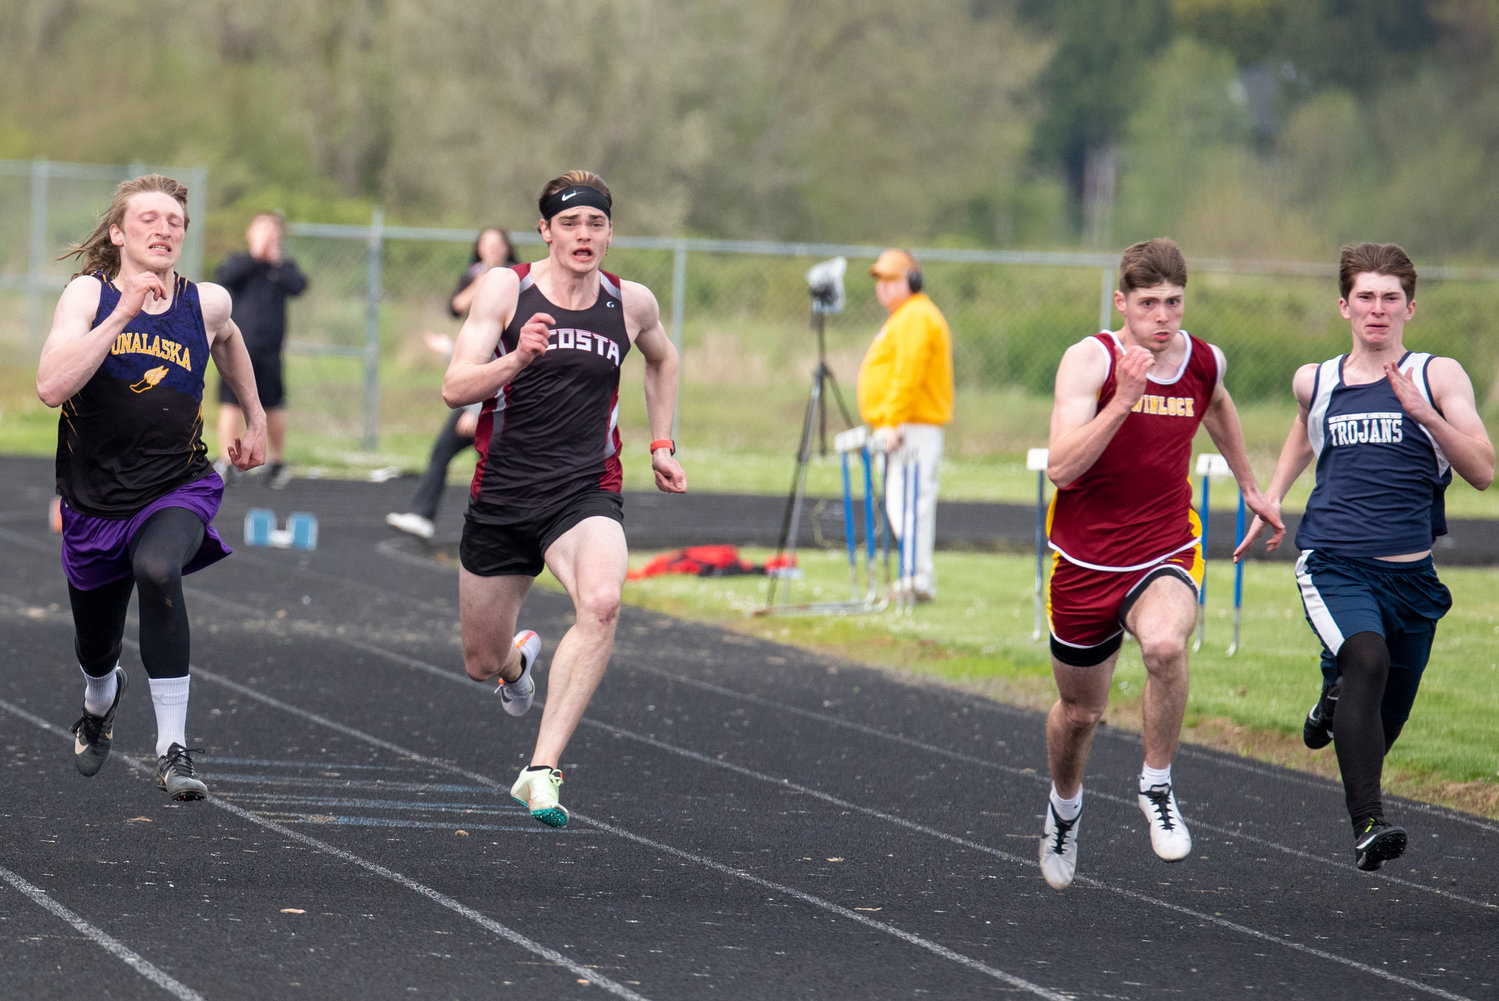 From left, Onalaska's Cole Taylor, Ocosta's William Idso, Winlock's Payton Sickles and Pe Ell's Carter Phelps race in the boys 100-meter dash on May 3. Sickles won the event.